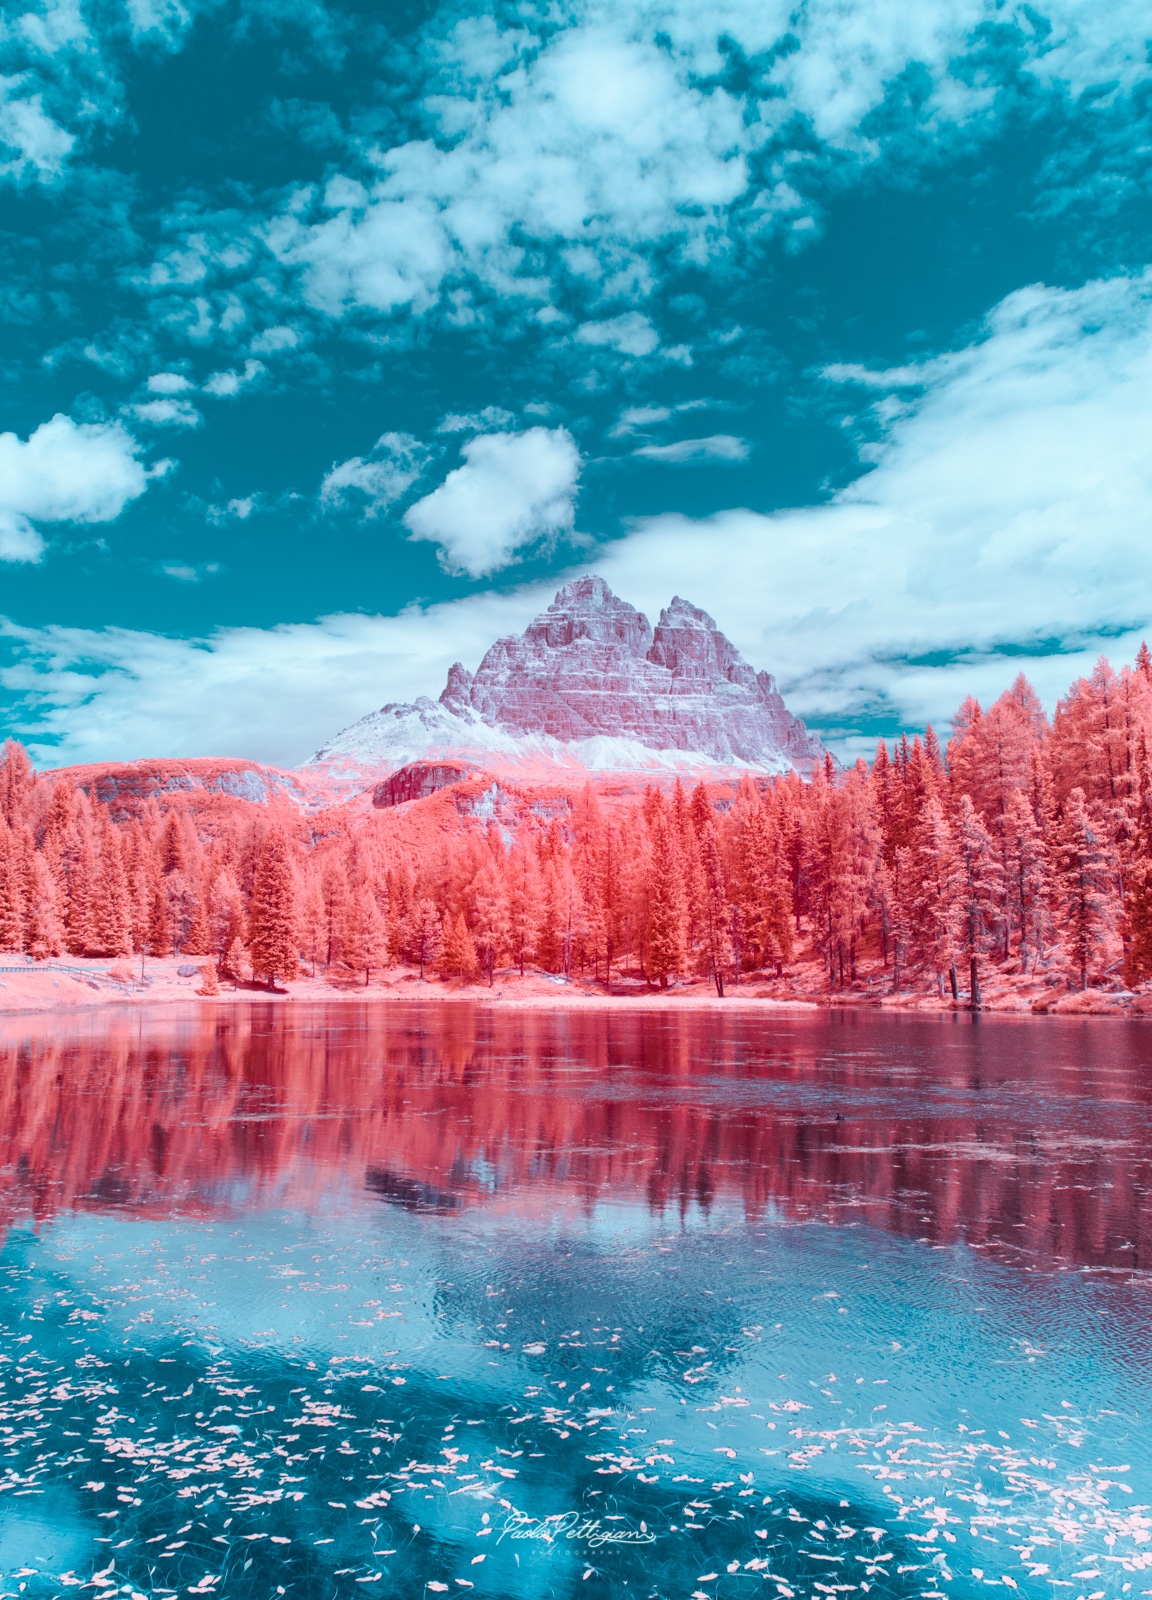 Infrared Photography Turns Swiss Landscapes into Pink 